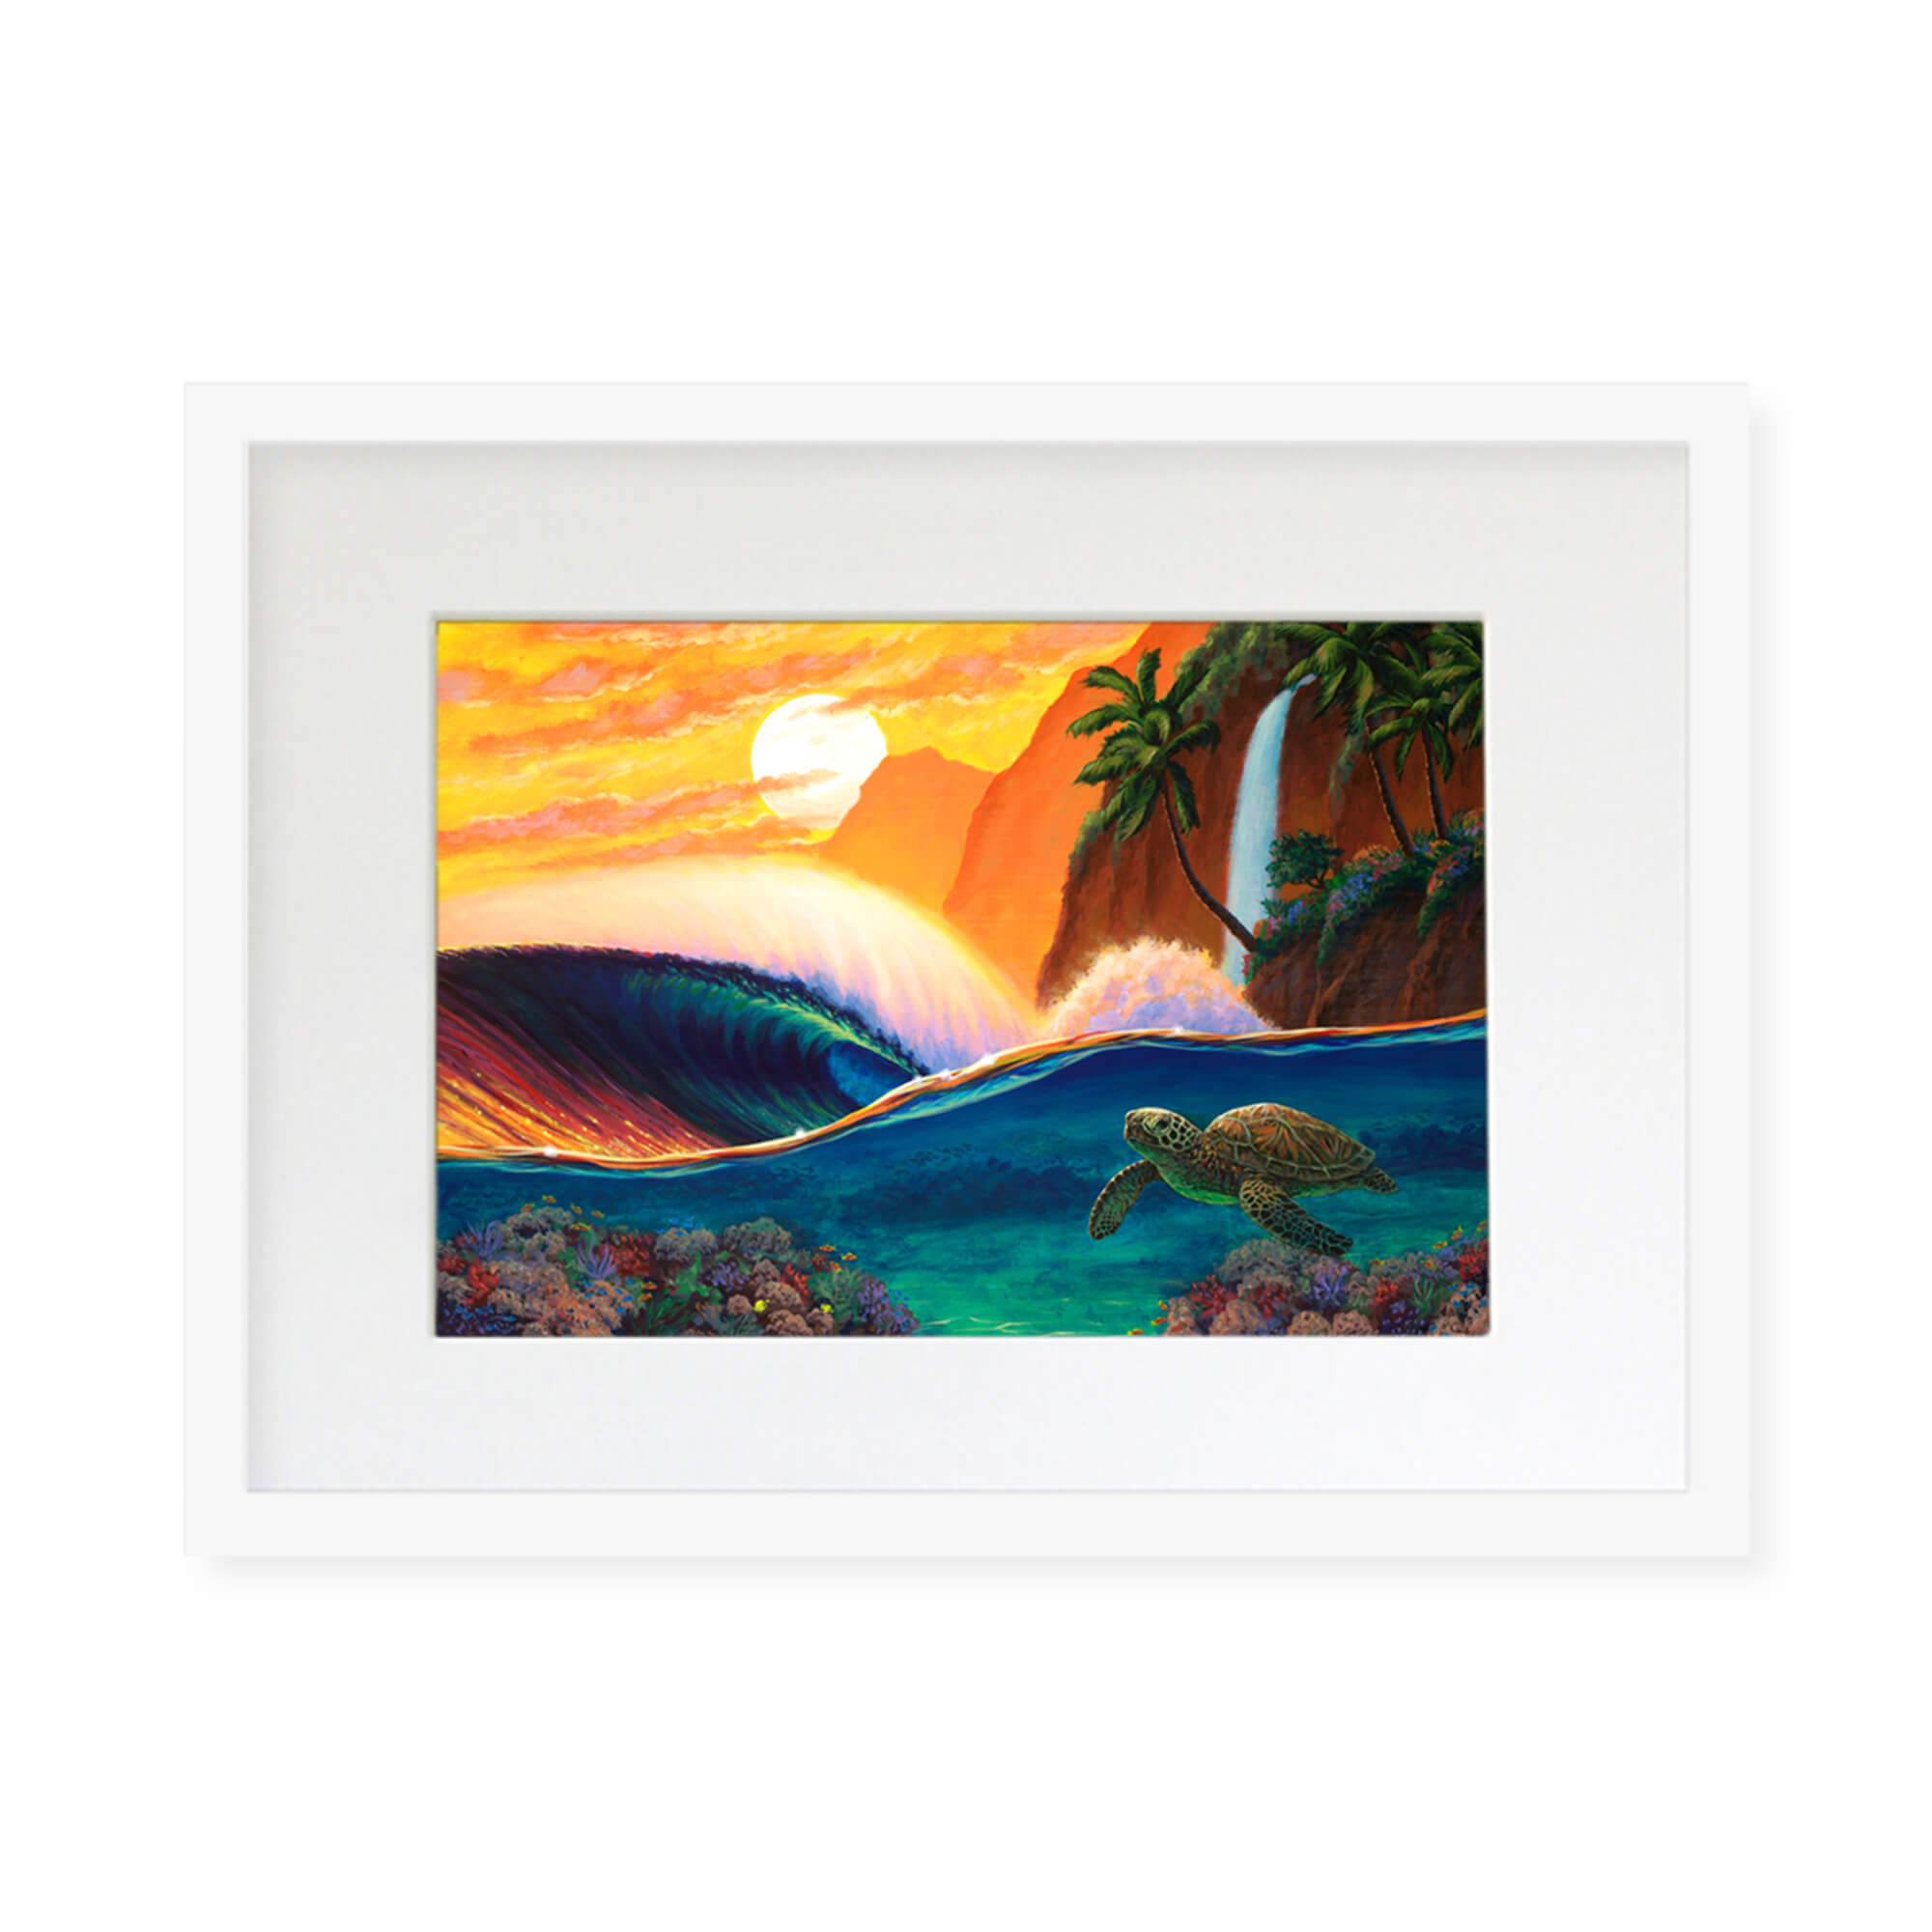 A framed matted art print featuring a sea turtle swimming and a vibrant sunset, crashing waves, and a mountain waterfall background by Hawaii artist Patrick Parker